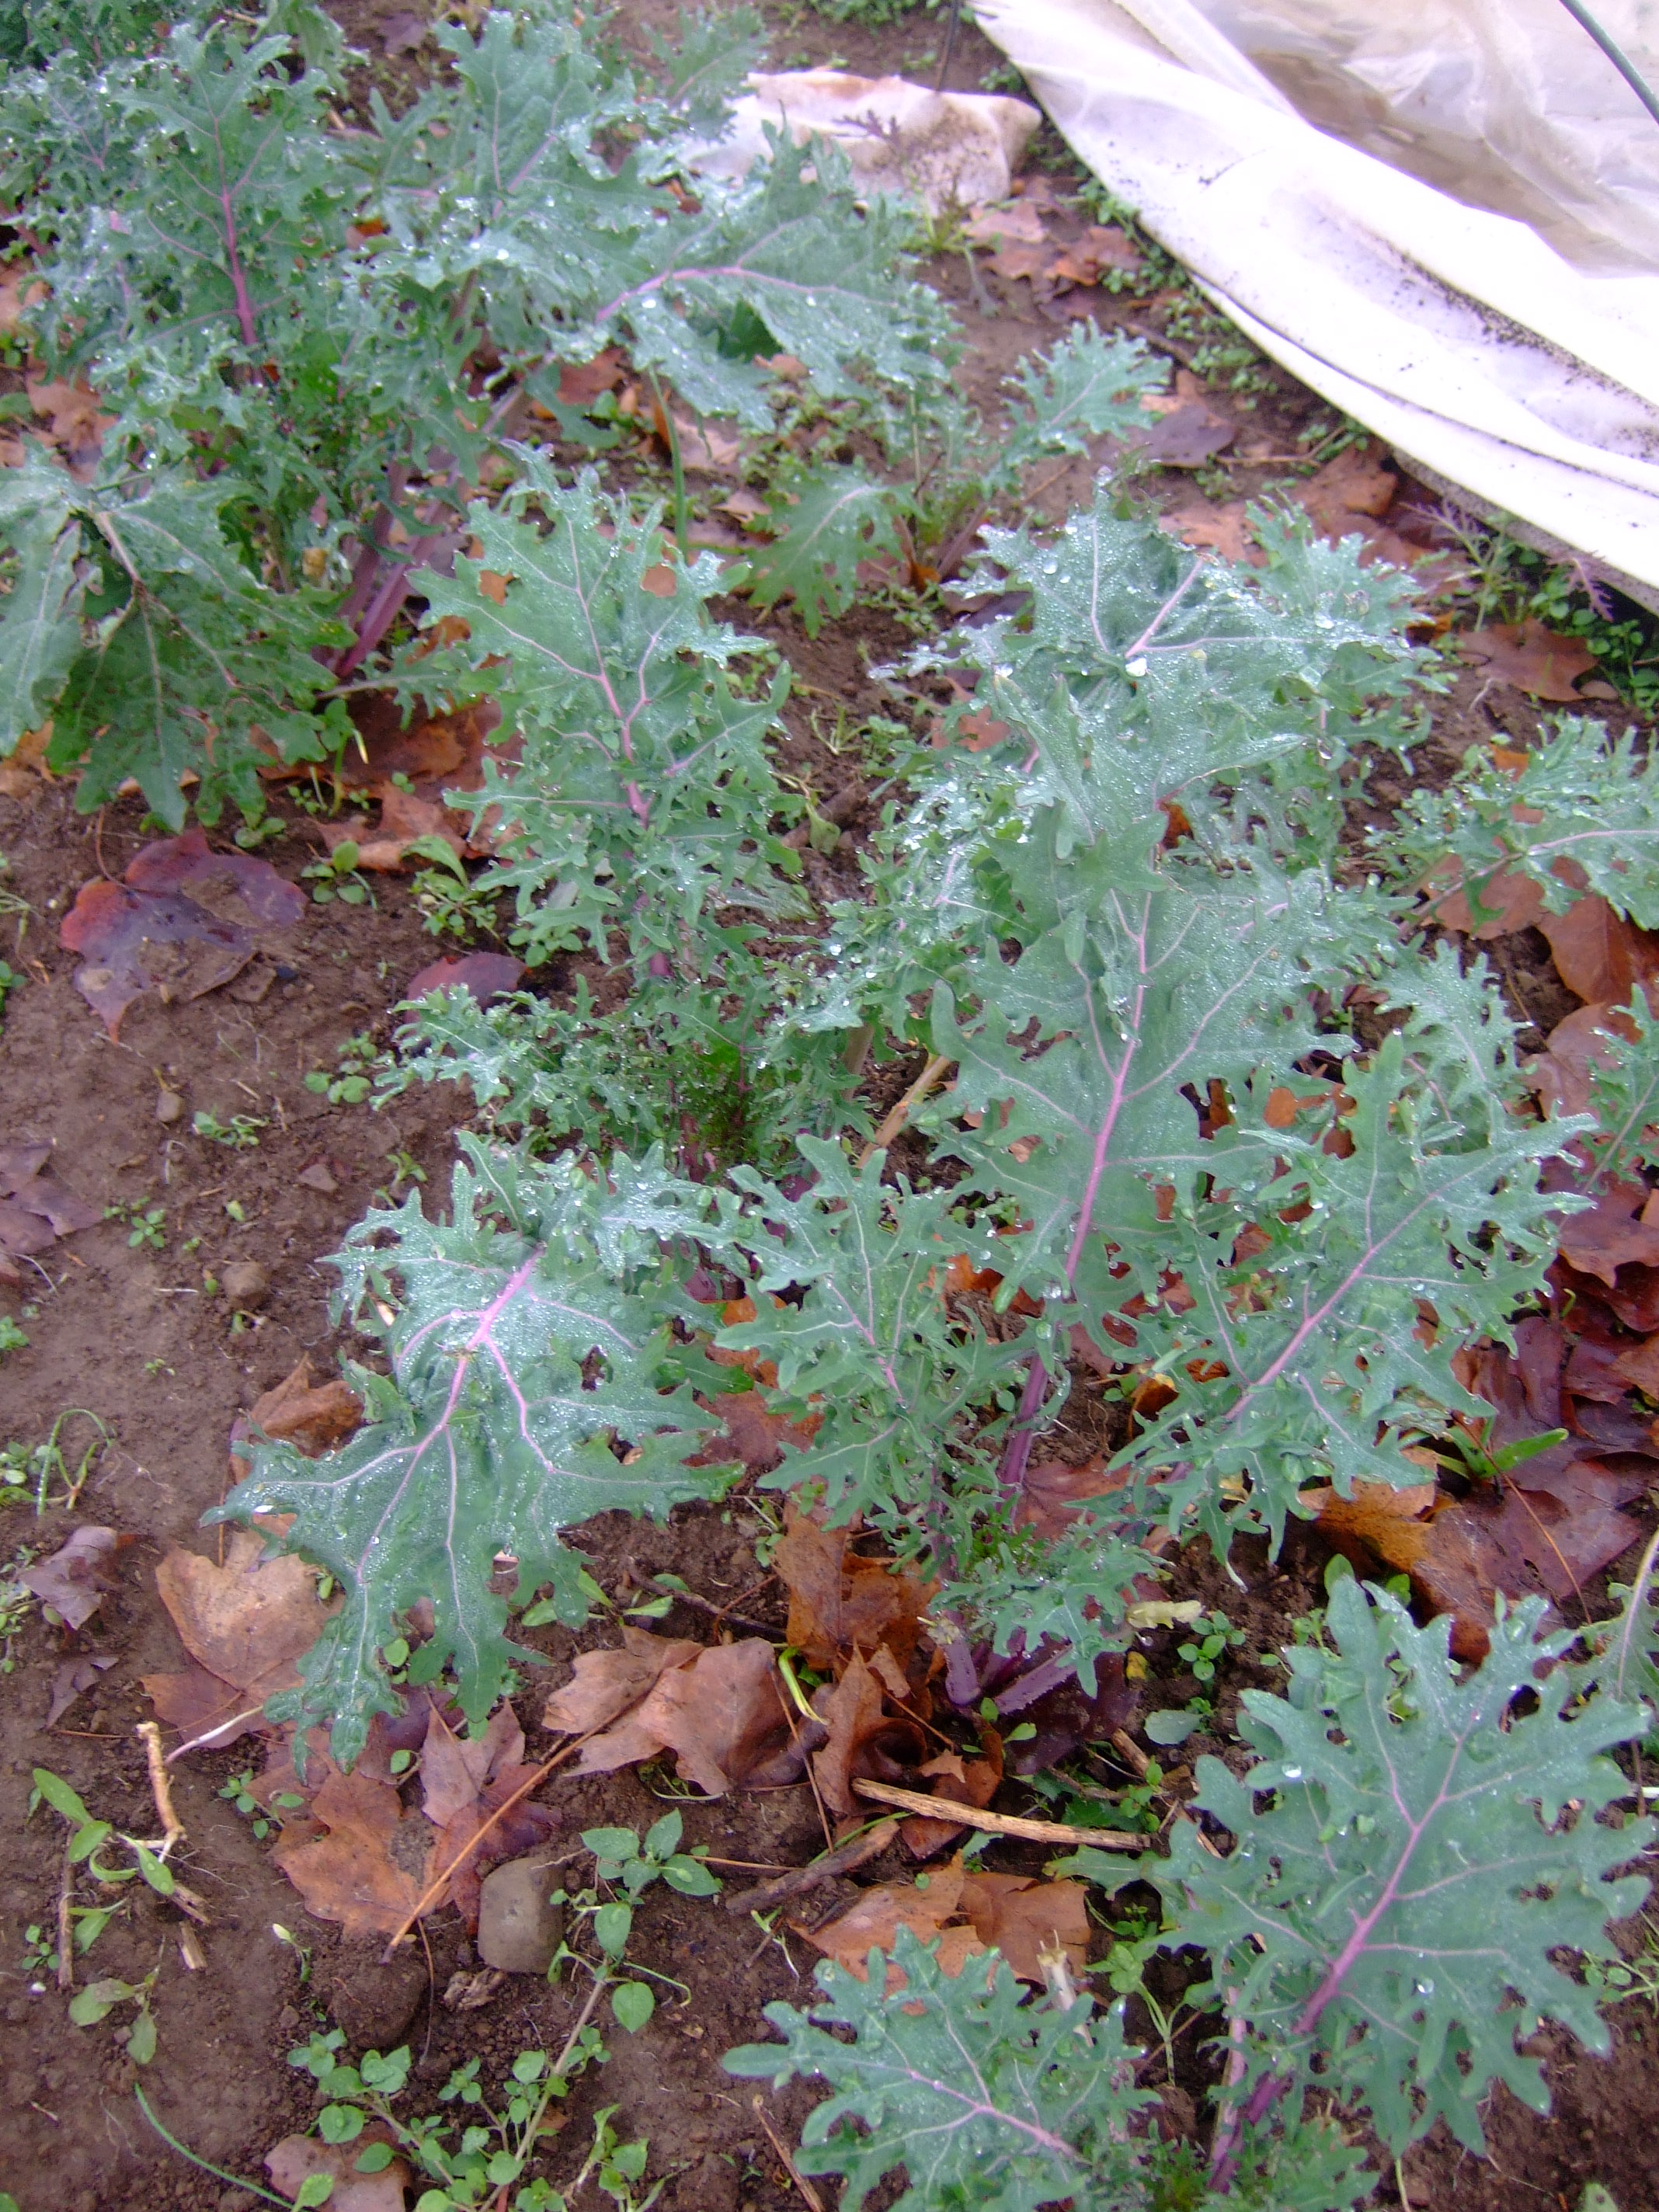 Russian Red Kale in cold frames, December 2012.